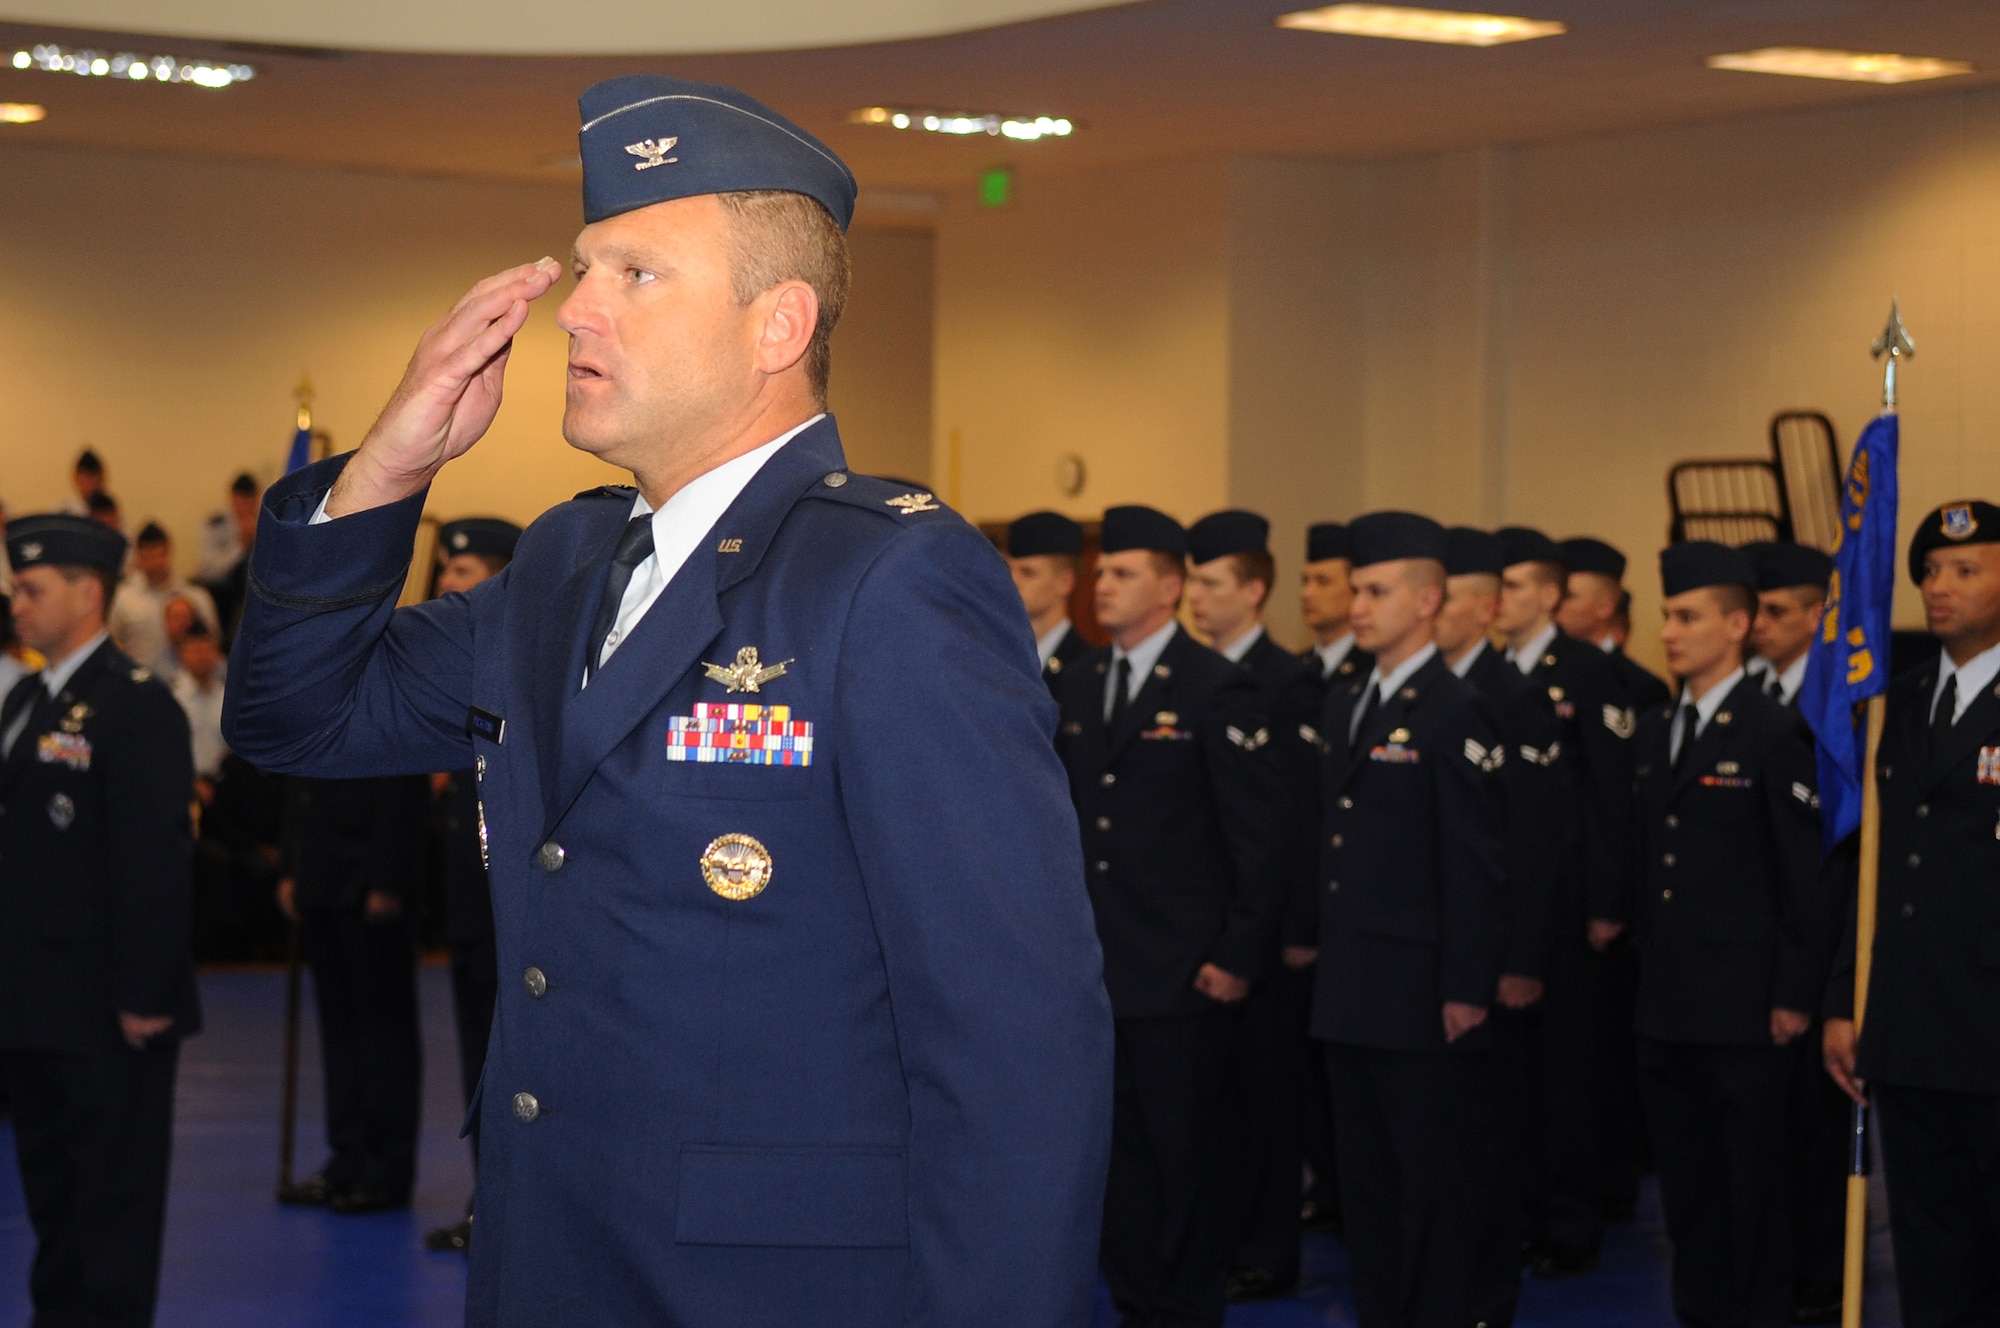 BUCKLEY AIR FORCE BASE, Colo.-- Col. Trent Pickering, incoming 460th Space Wing commander, renders a salute to the  outgoing commander, Col. Clint Crosier (not shown), at a  relinquishment of command ceremony April 25, 2011. (U.S. Air Force photo by Airman Manisha Vasquez)